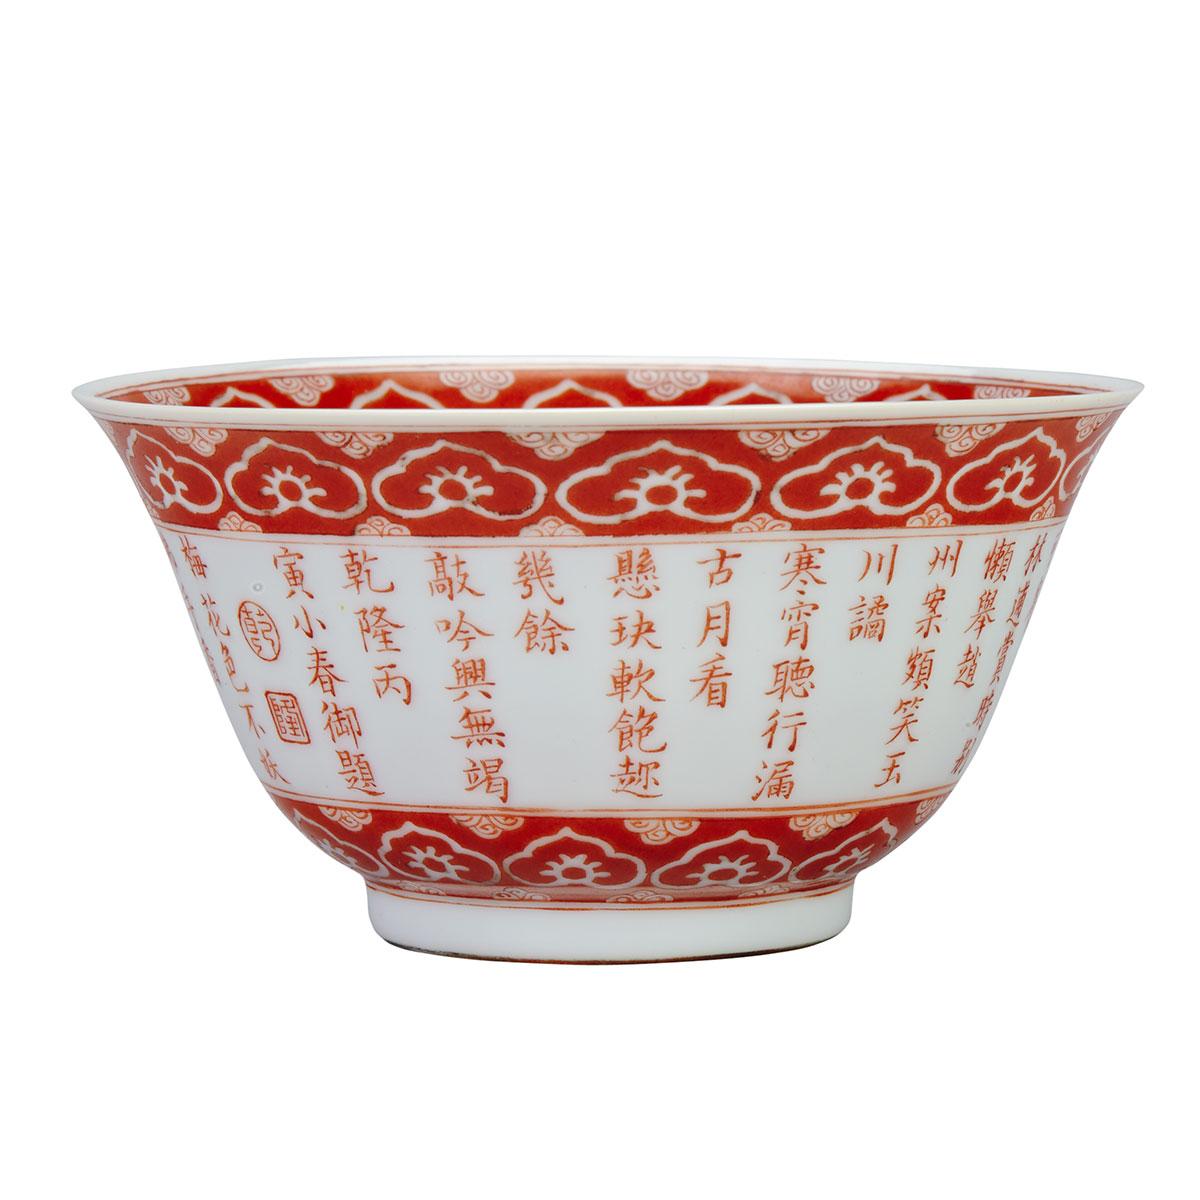 Iron Red ‘Poem’ Tea Bowl, Qianlong Mark and Period (1736-1795)